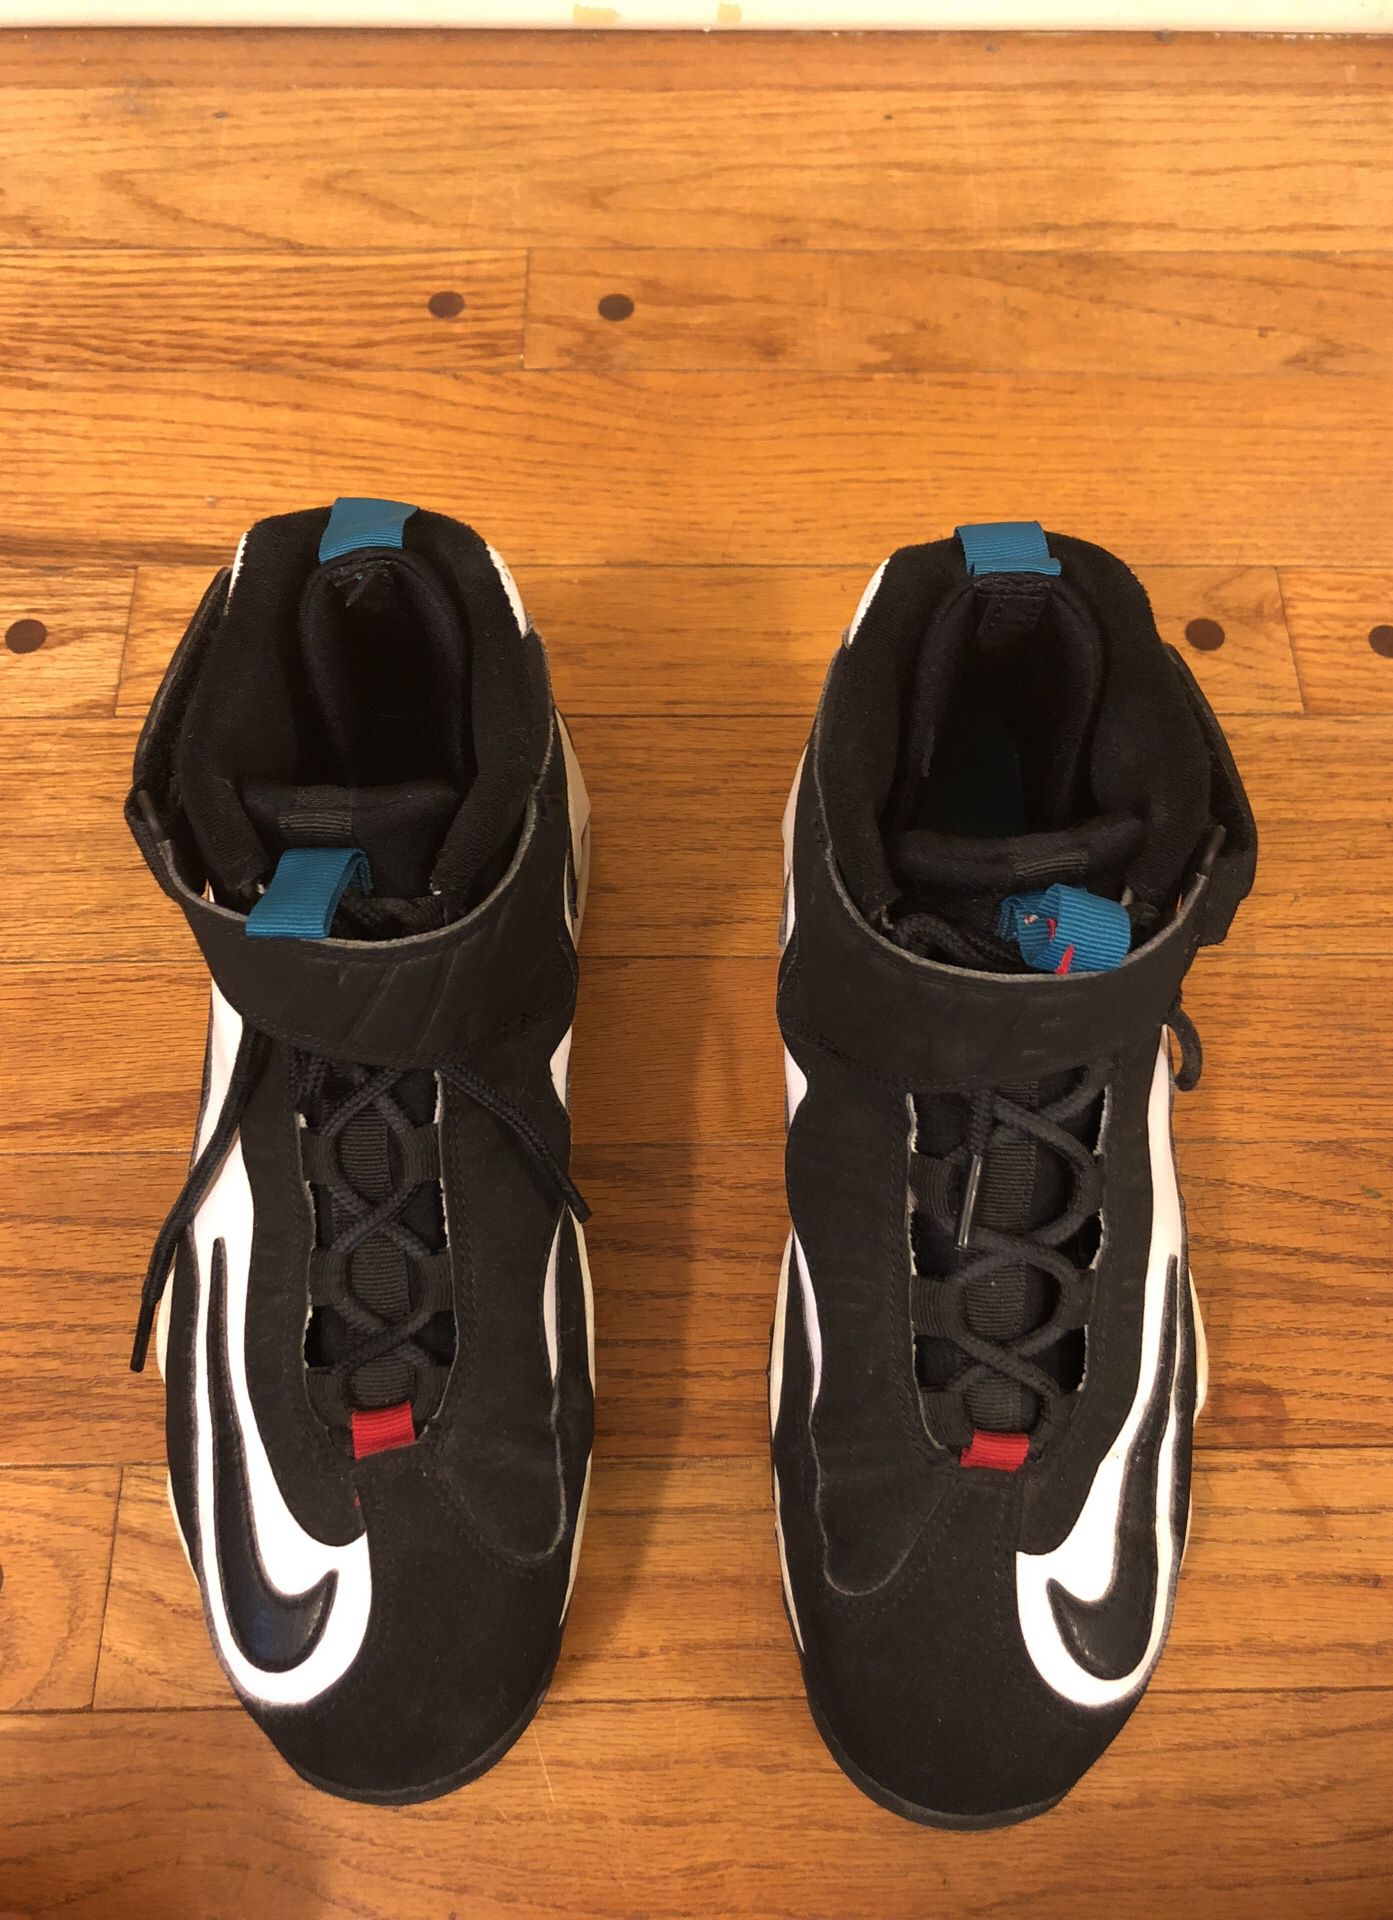 Nike Ken Griffey jr. Shoes for Sale in Happy Valley, OR - OfferUp